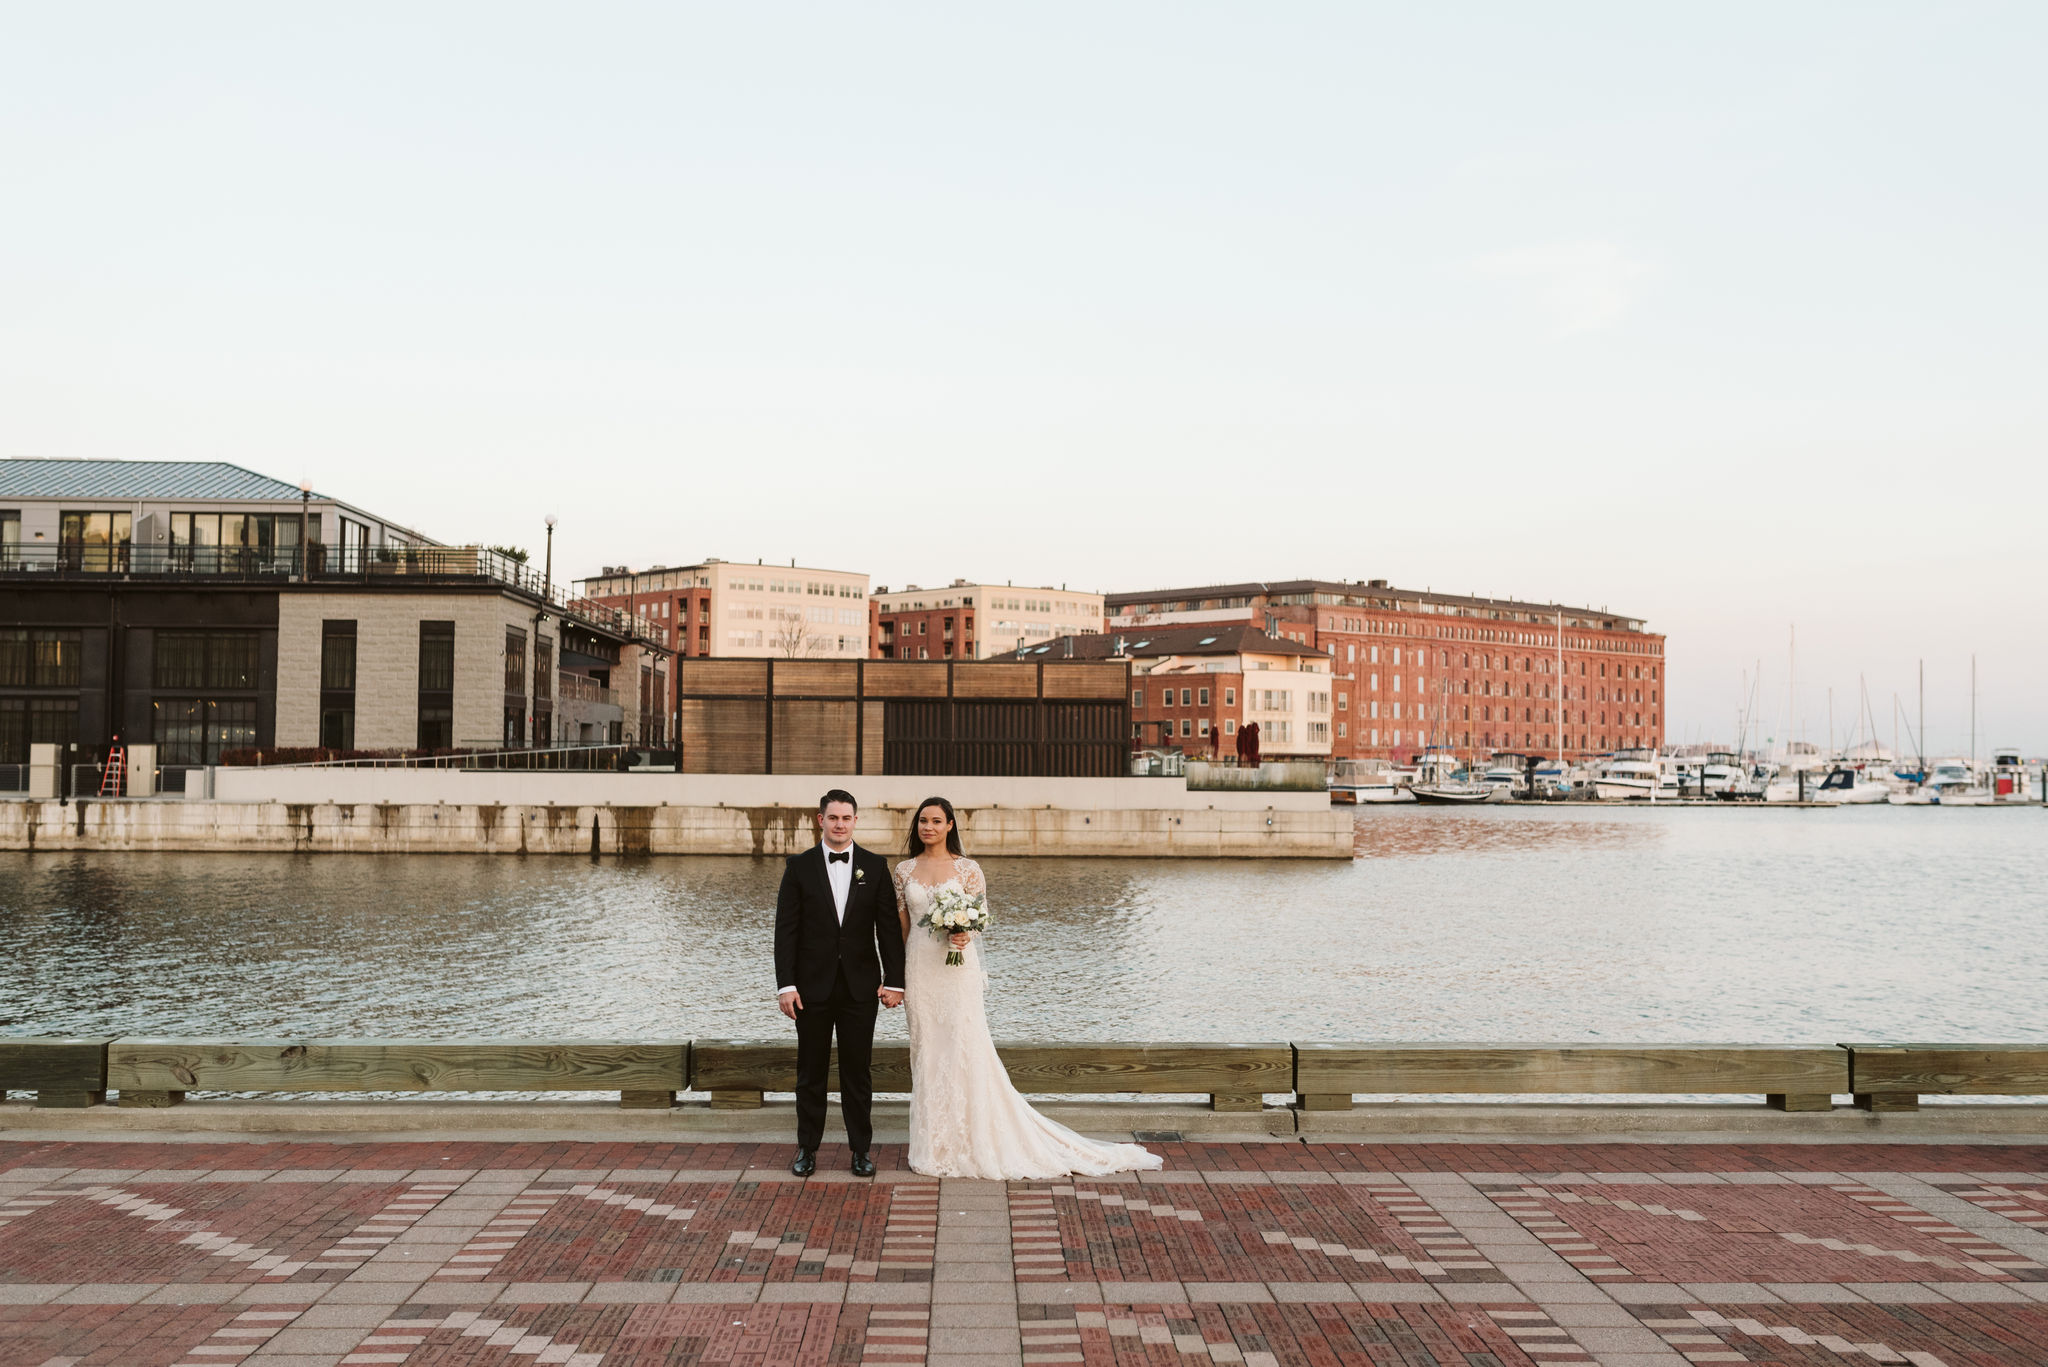  Baltimore, Fells Point, Maryland Wedding Photographer, Winter Wedding, Historic, Classic, Vintage, Portrait of Bride and Groom in Front of Water, Inner Harbor 